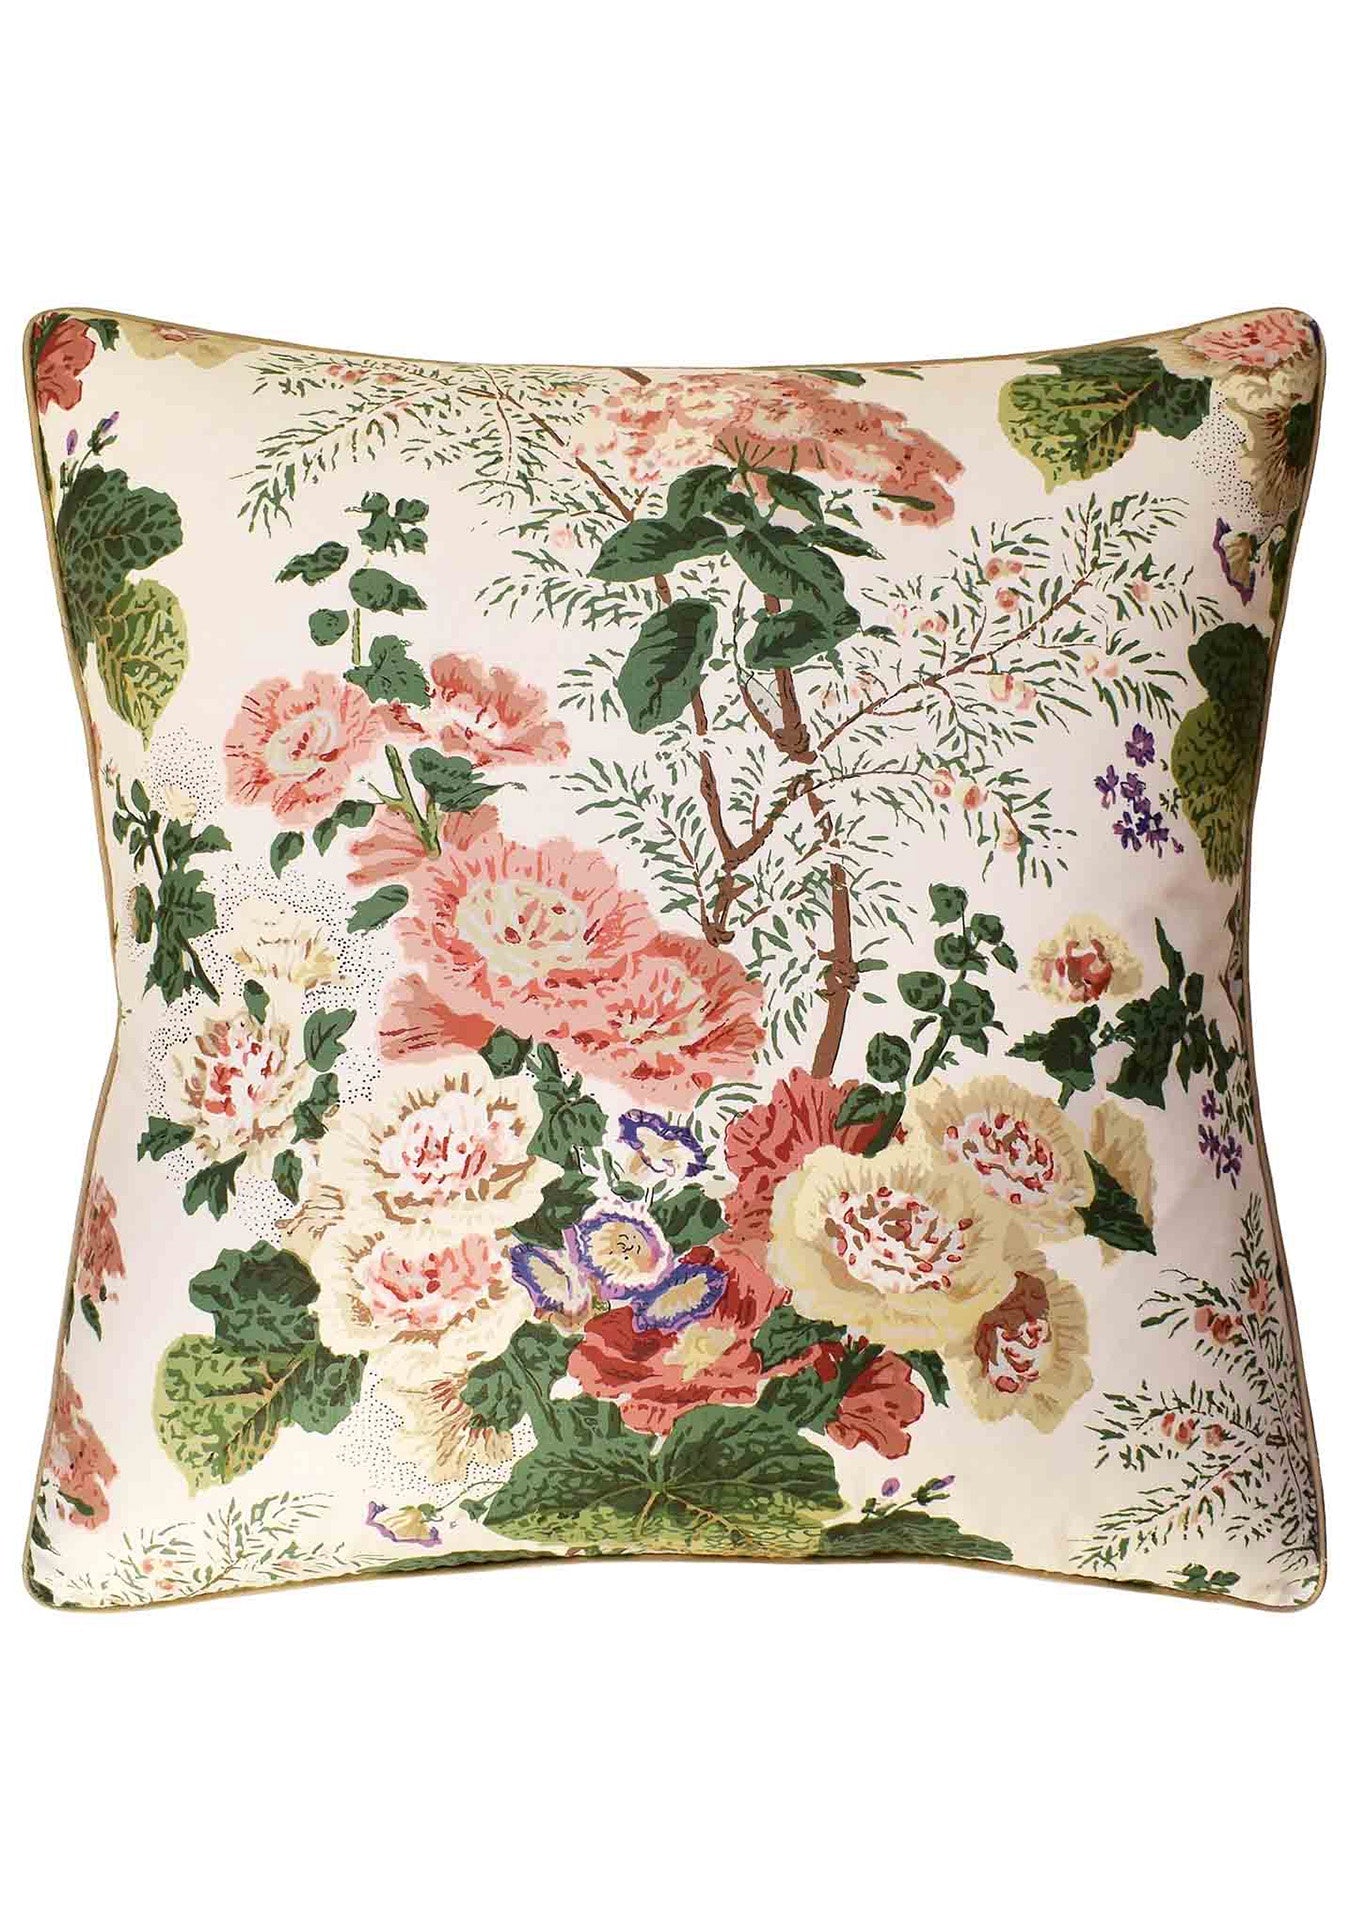 Decorative pillow featuring a floral pattern with large pink and white blooms, green foliage, and smaller purple flowers on an off-white background in Arizona-style.
Athea Blush Pillow 22 x 22 by Ryan Studio.